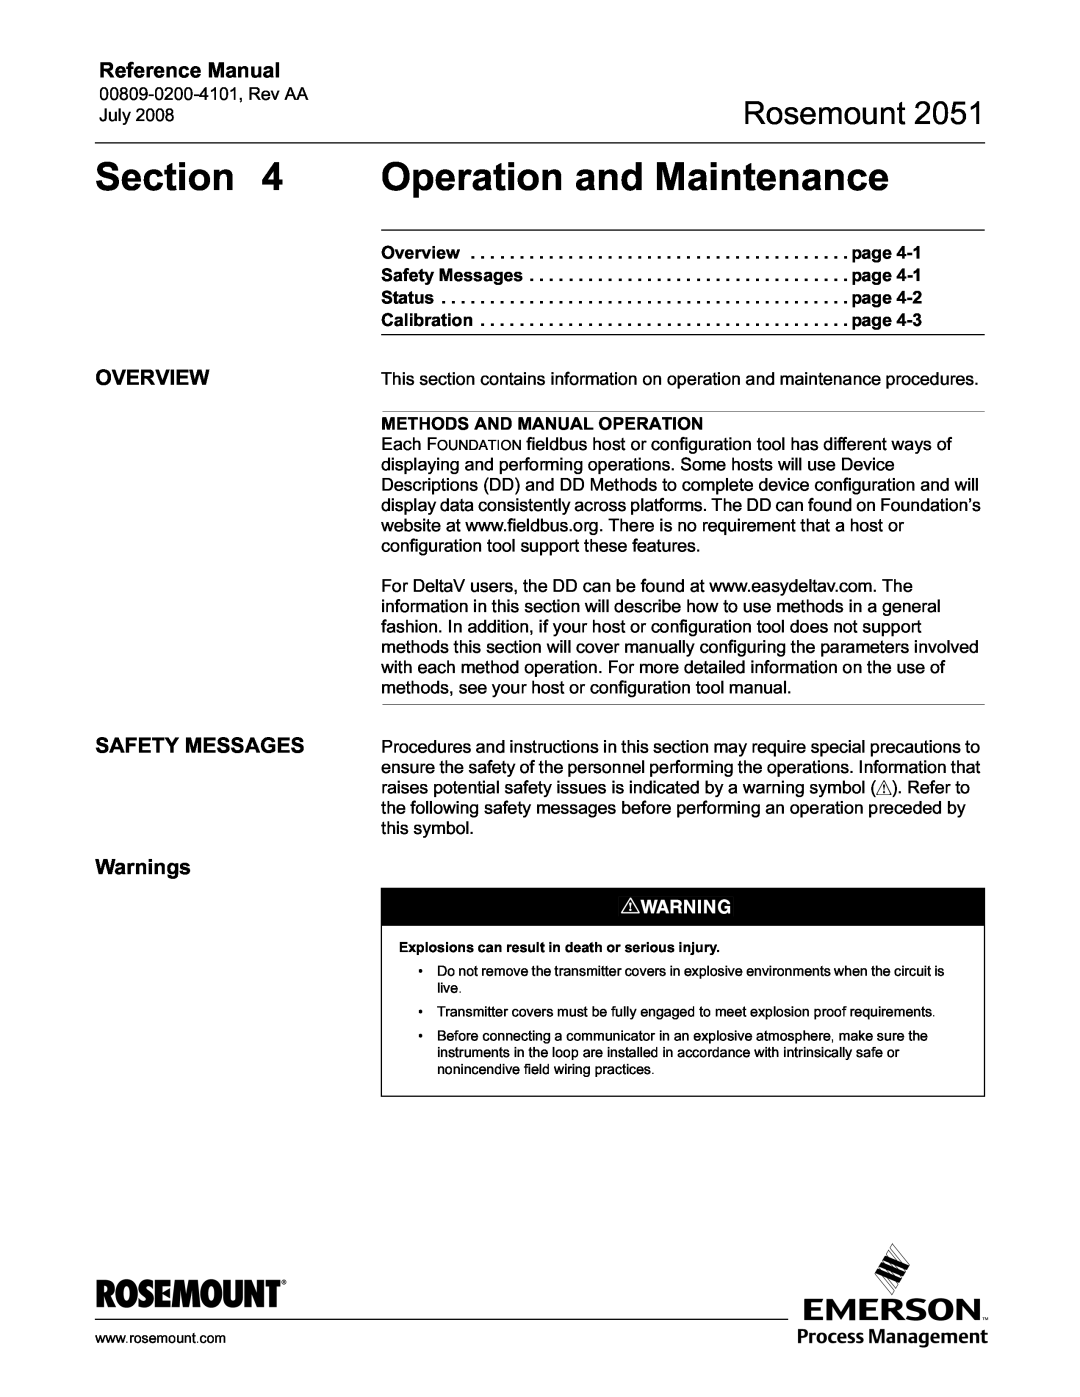 Emerson Process Management 2051 Operation and Maintenance, Rosemount, Reference Manual, OVERVIEW SAFETY MESSAGES Warnings 